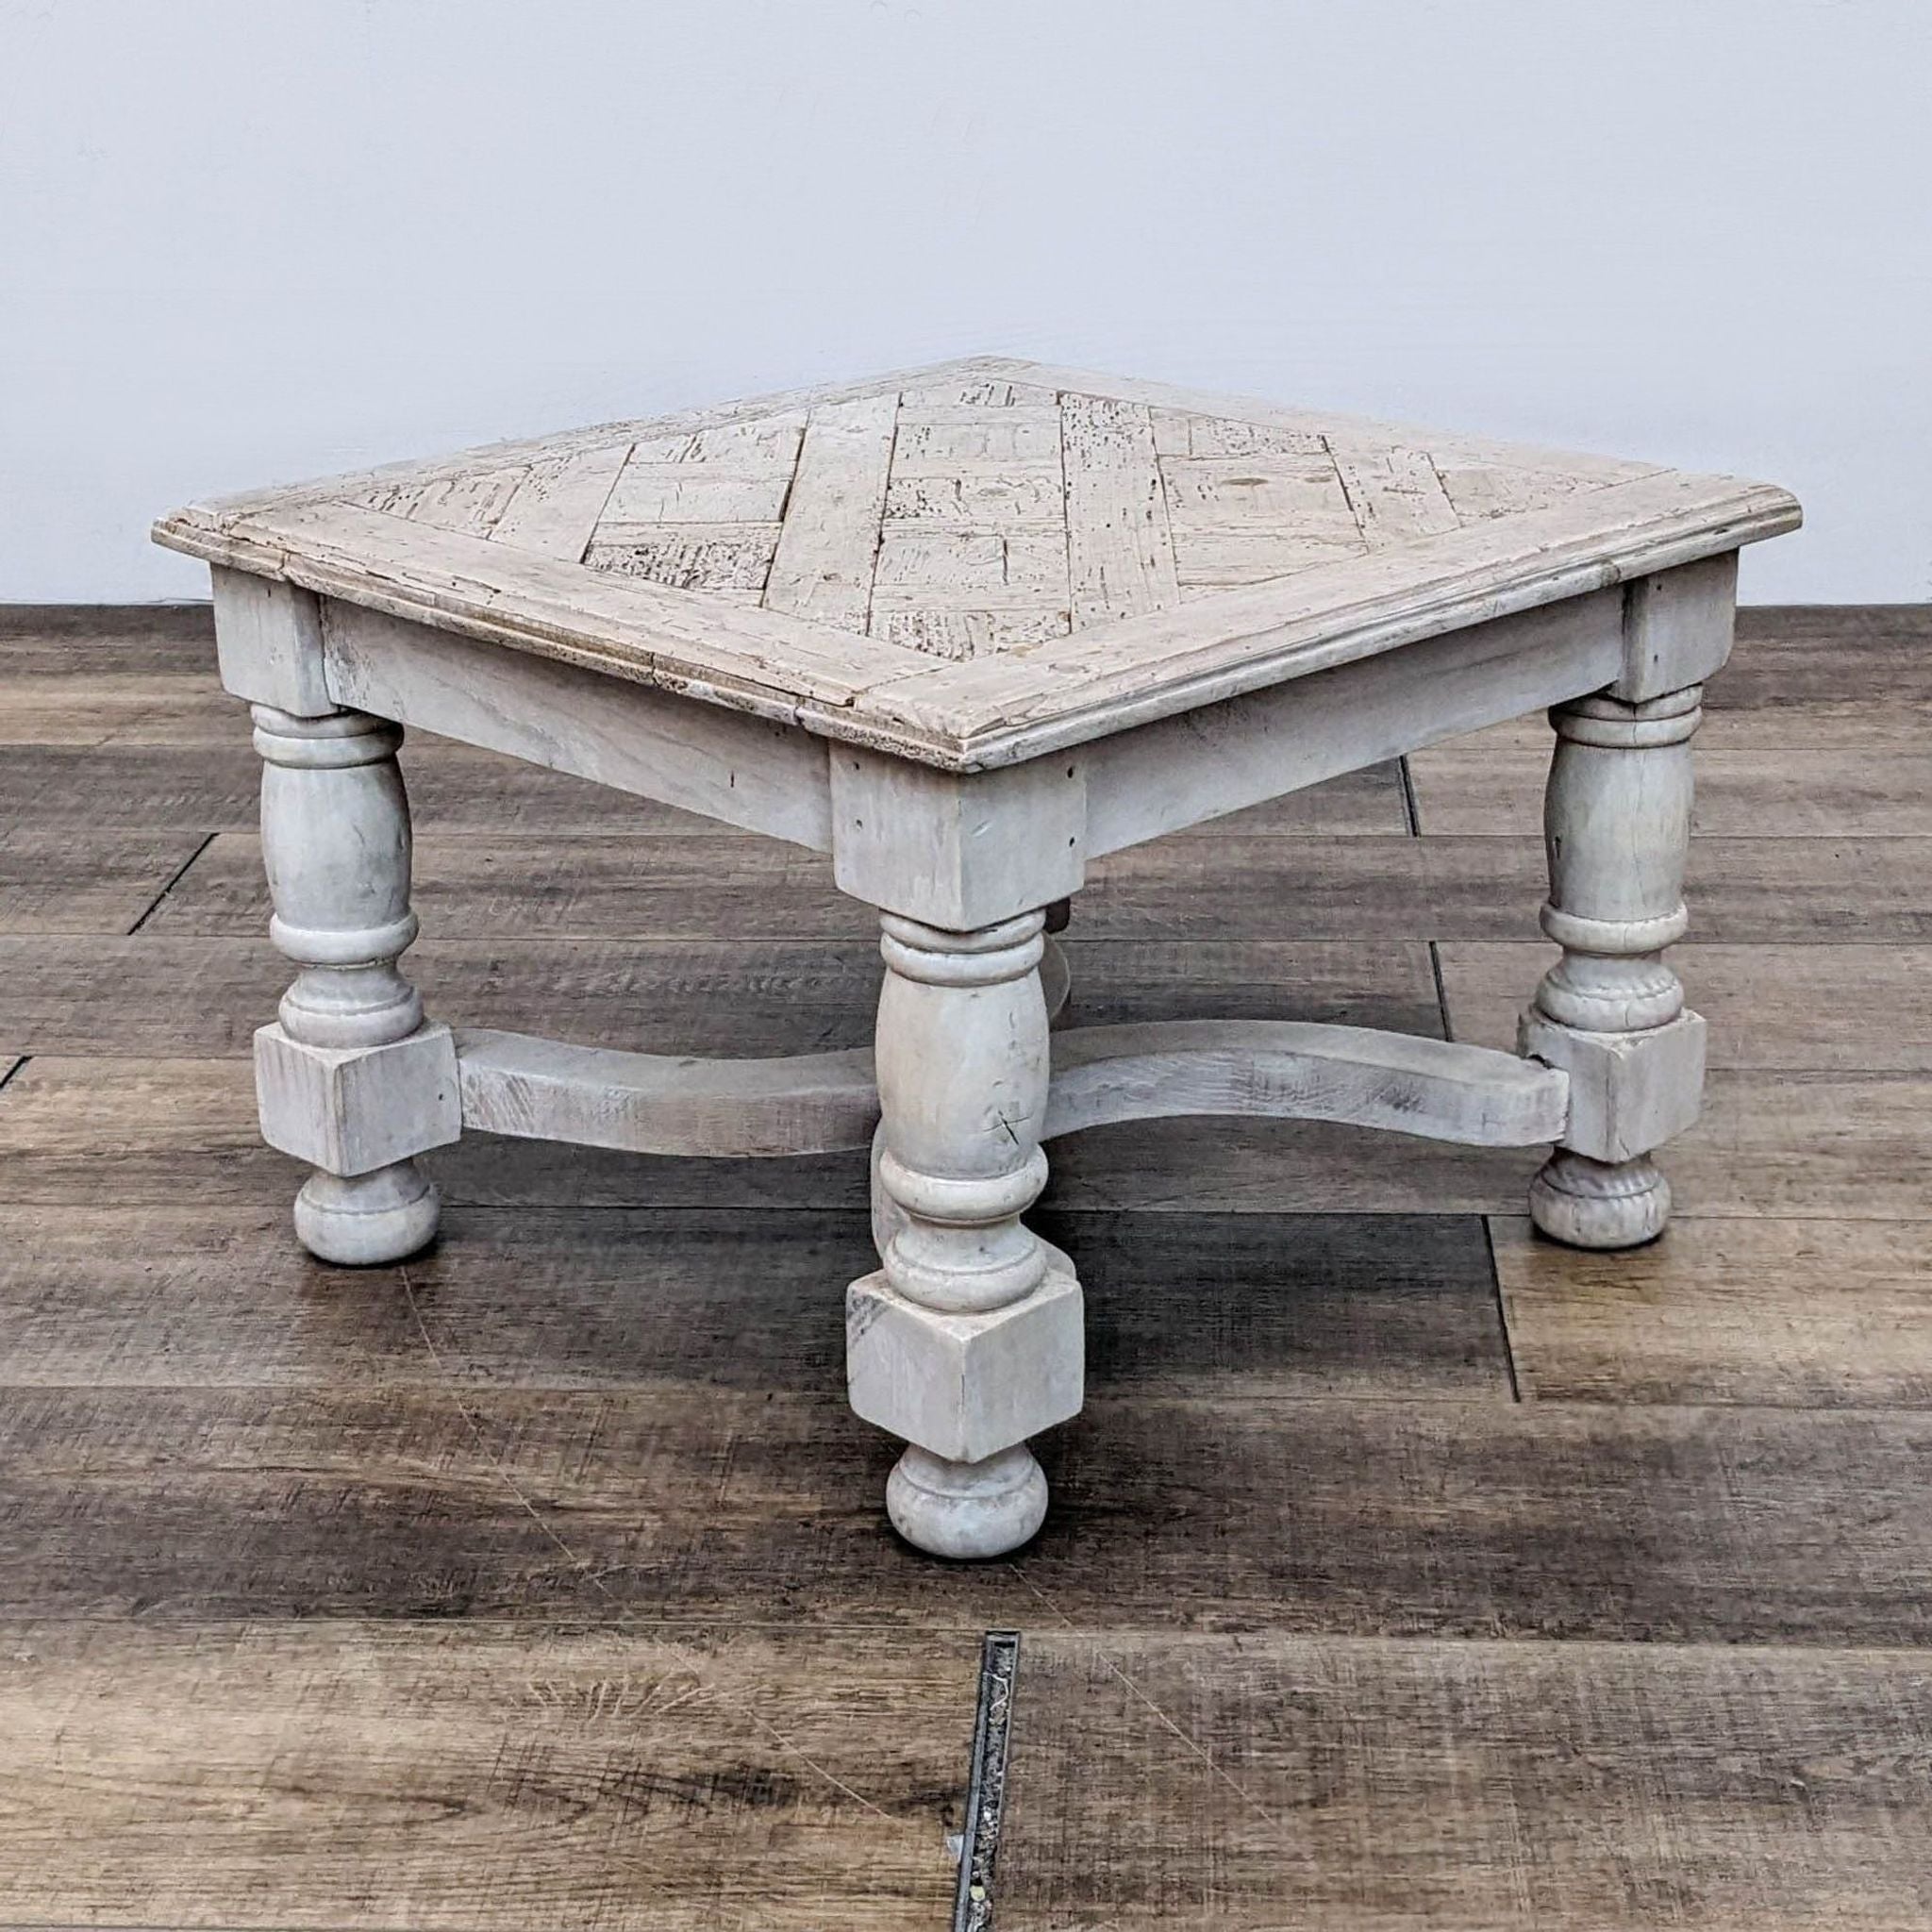 Distressed white square console table with geometric design and sturdy turned legs, by Reperch, shown in a room.